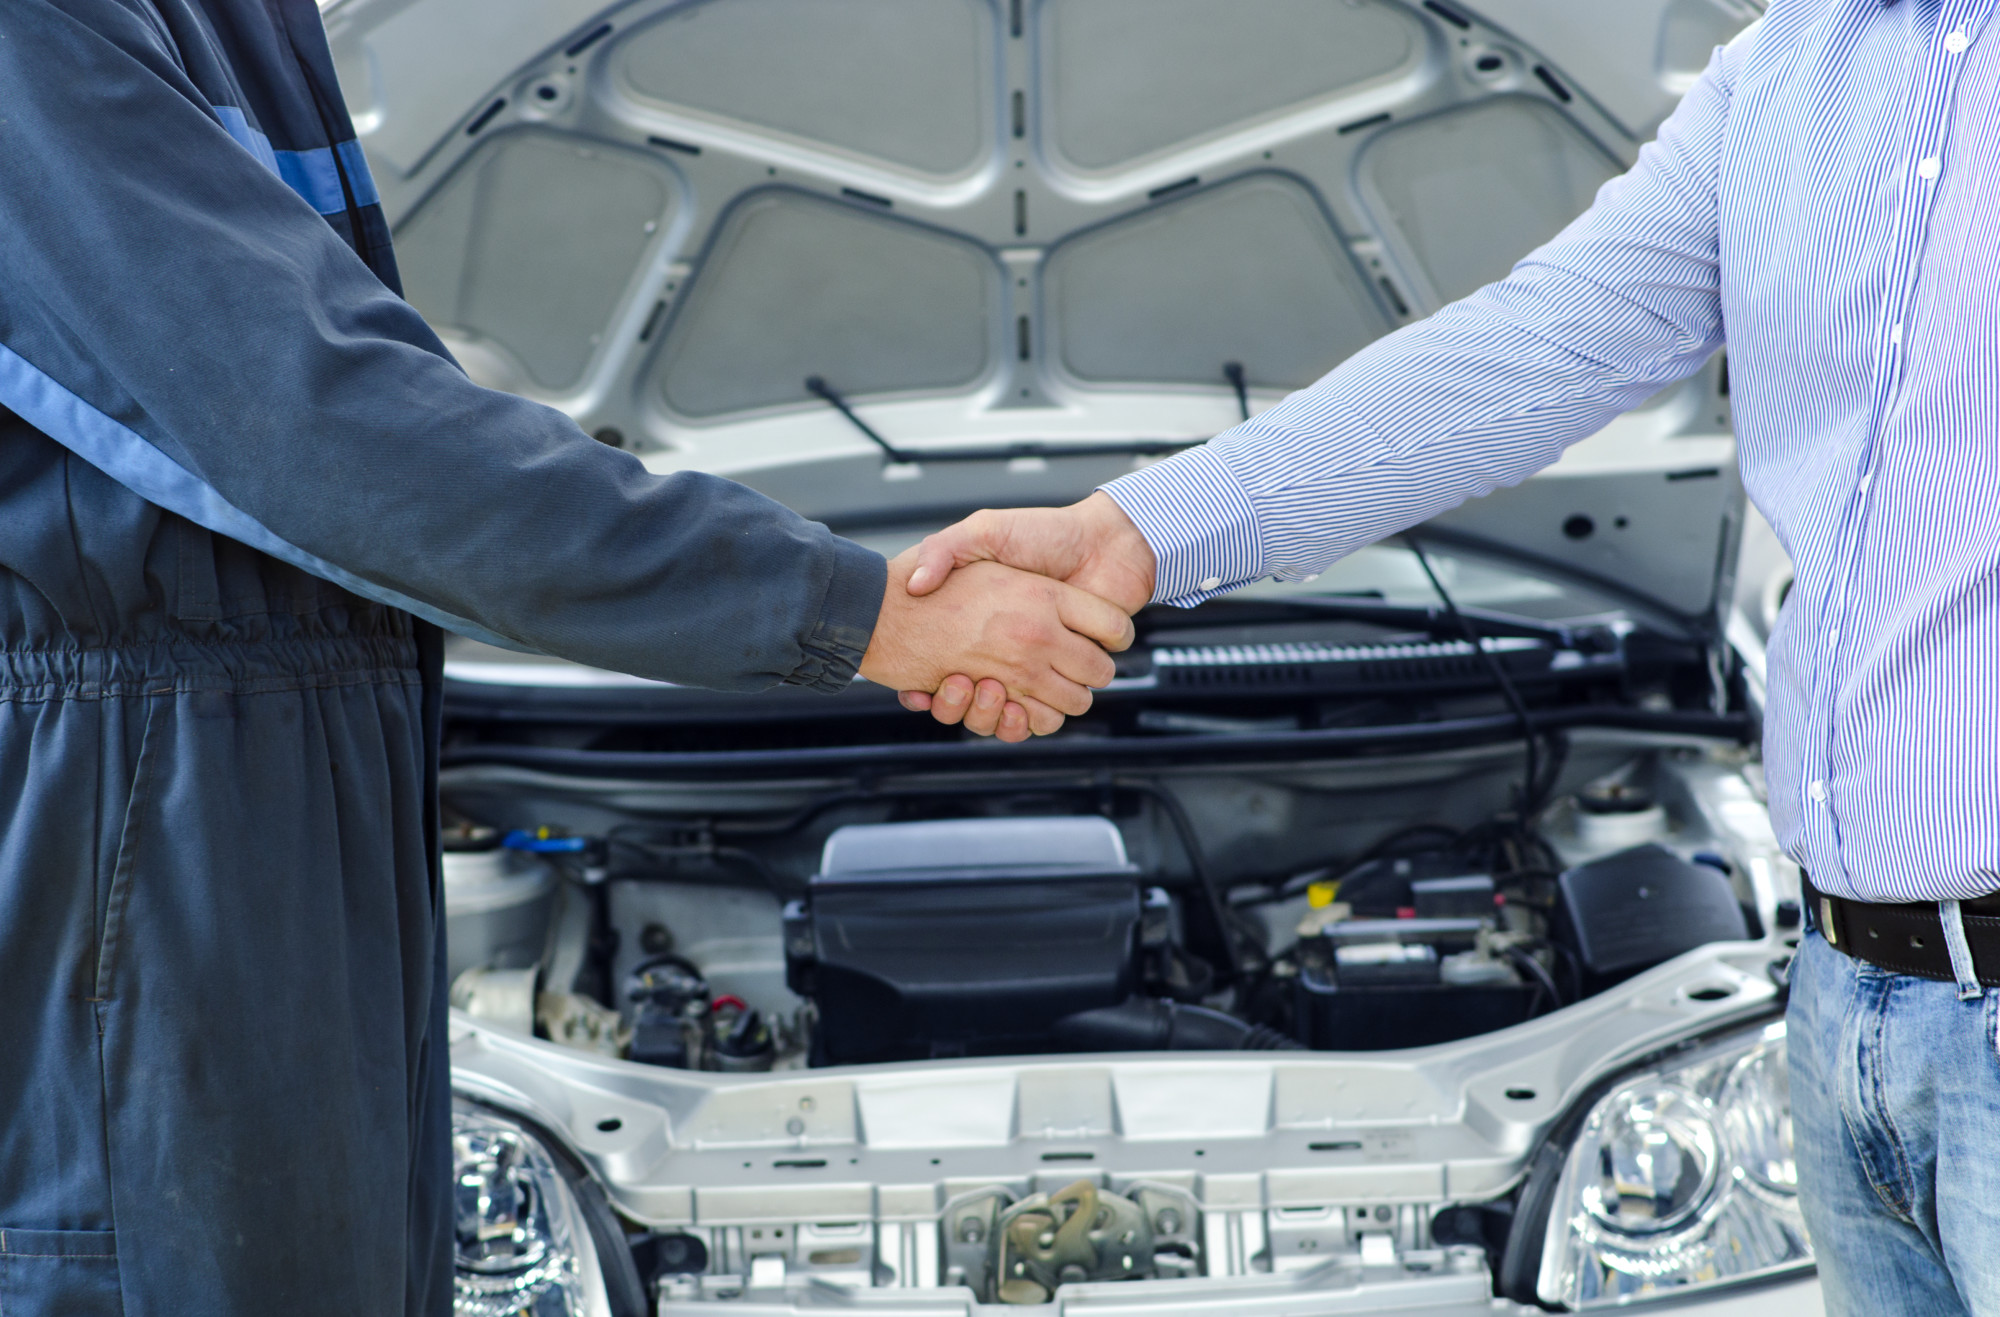 Customer Shaking Hand of Mechanic After Fixing His car Successfully